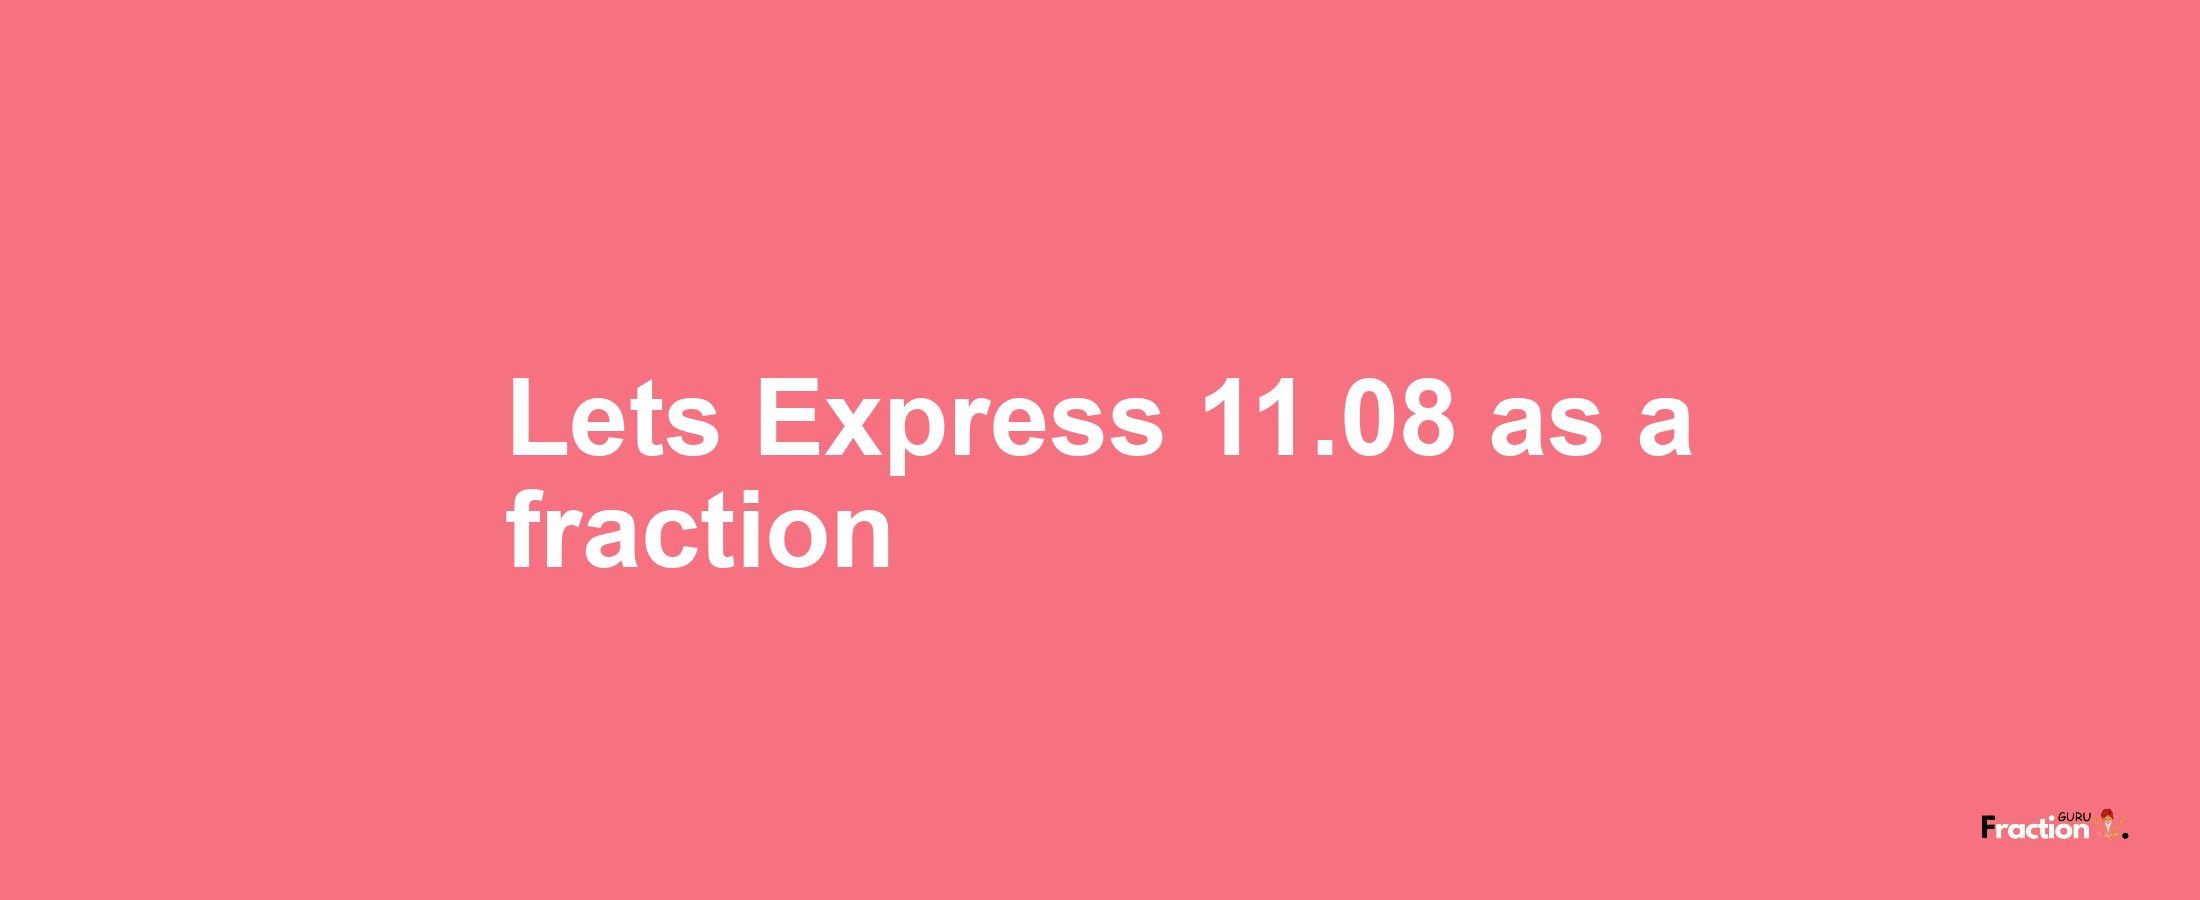 Lets Express 11.08 as afraction